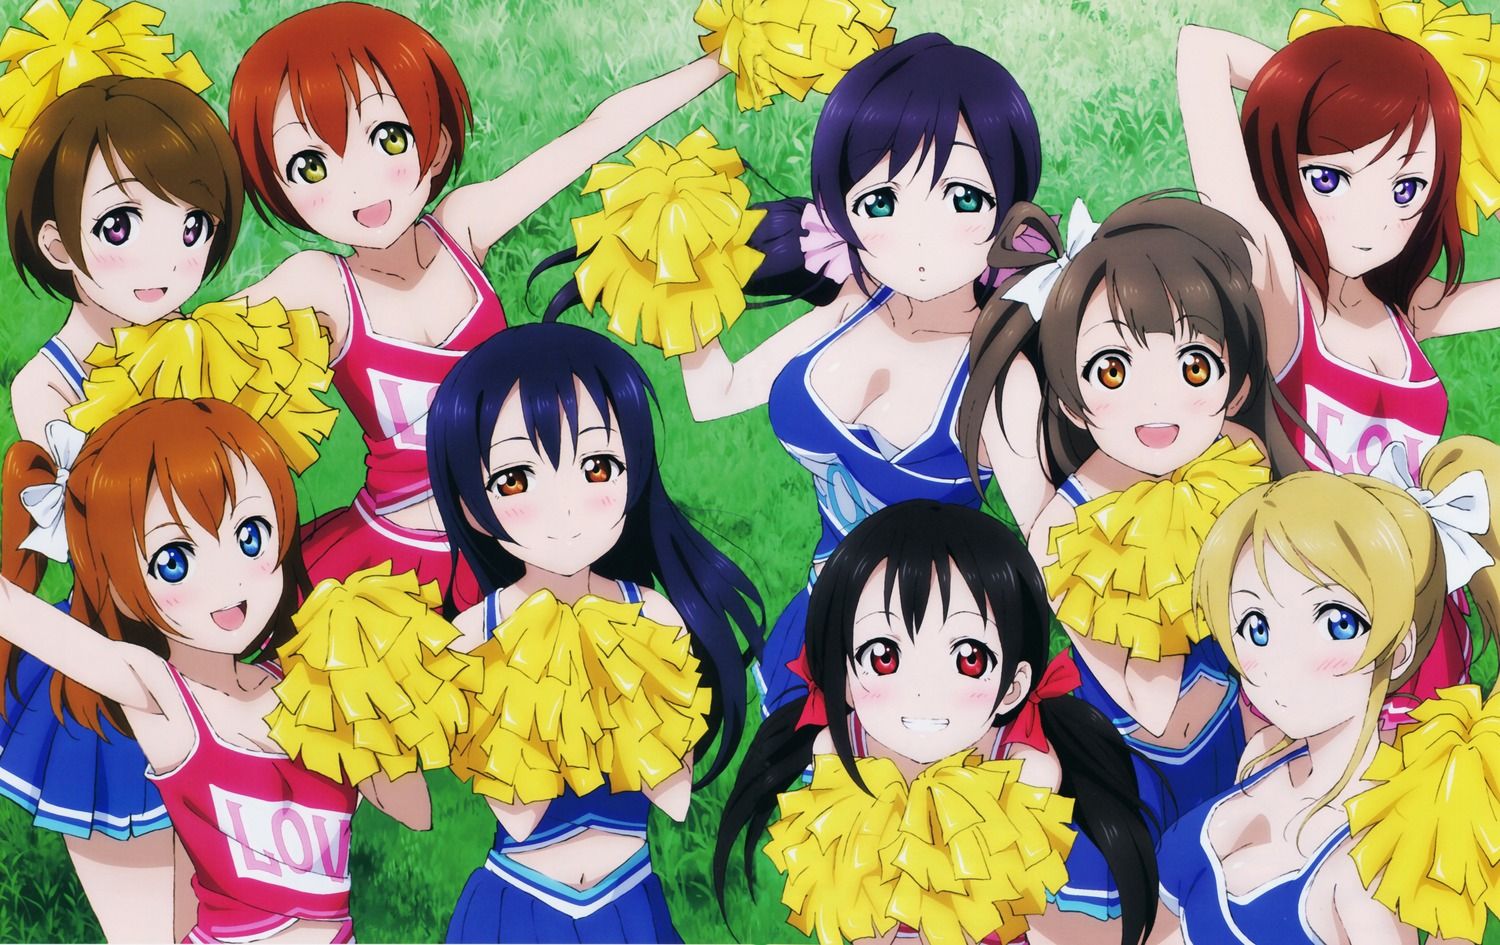 Love live! Wallpaper 05 [15 pictures] 3